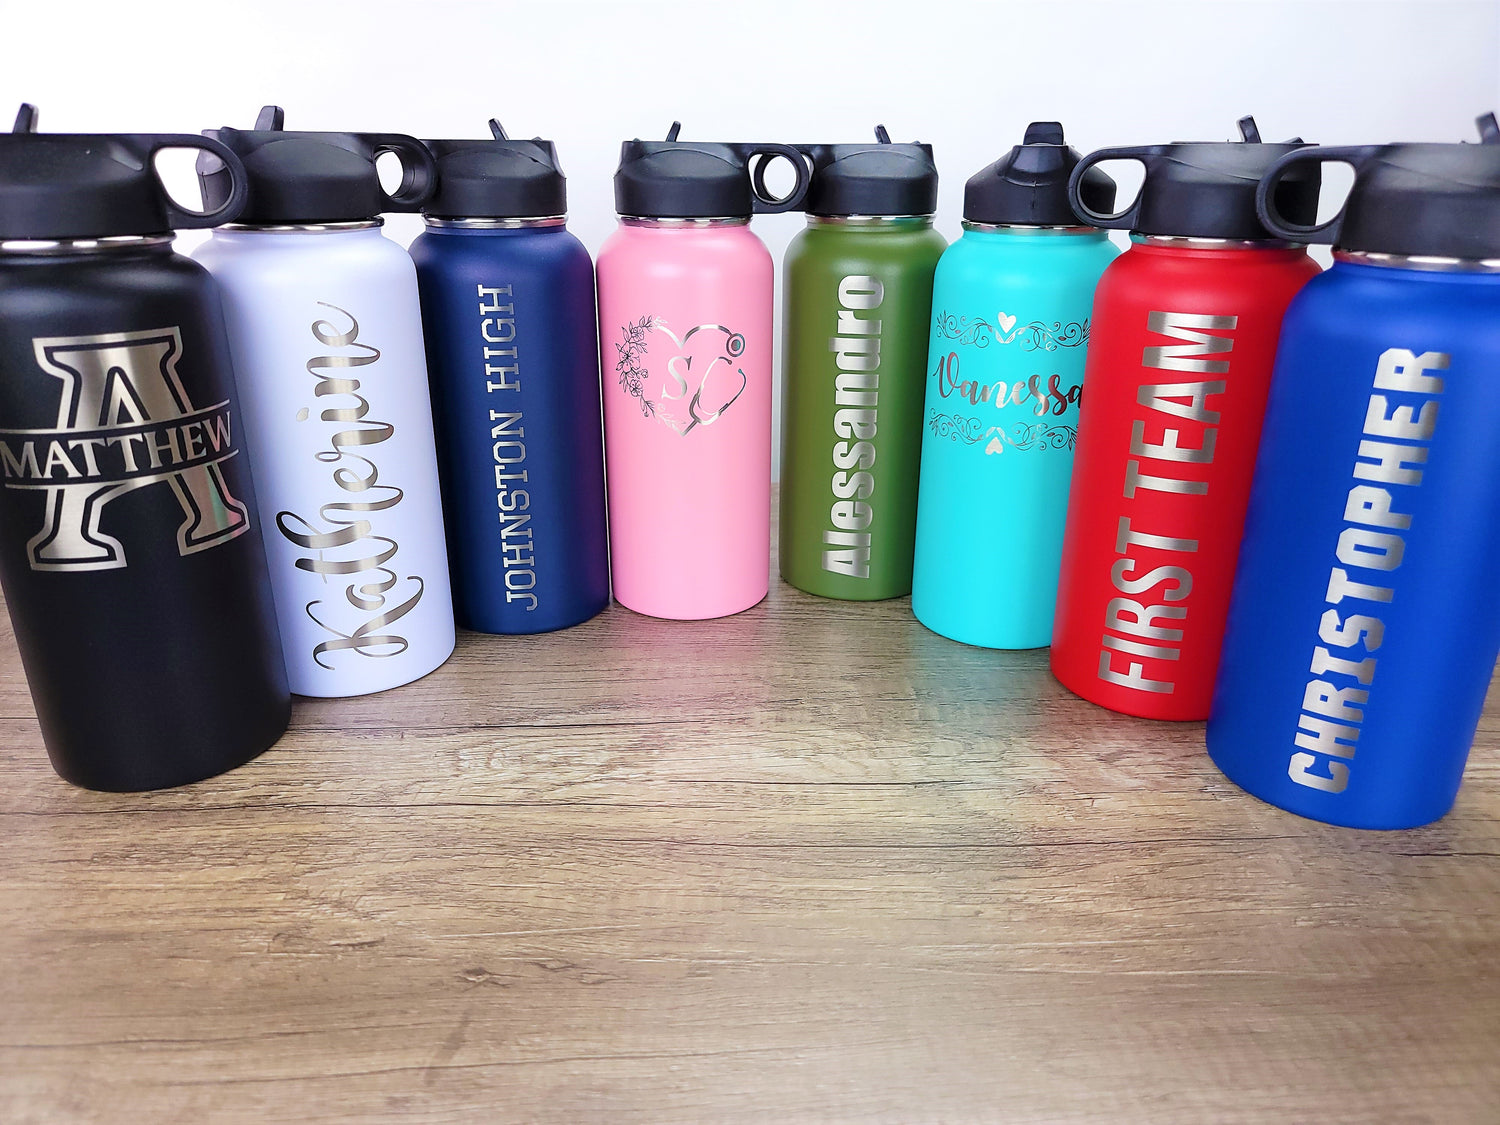 (Gift Set) Personalized Thermos - Laser Engraving